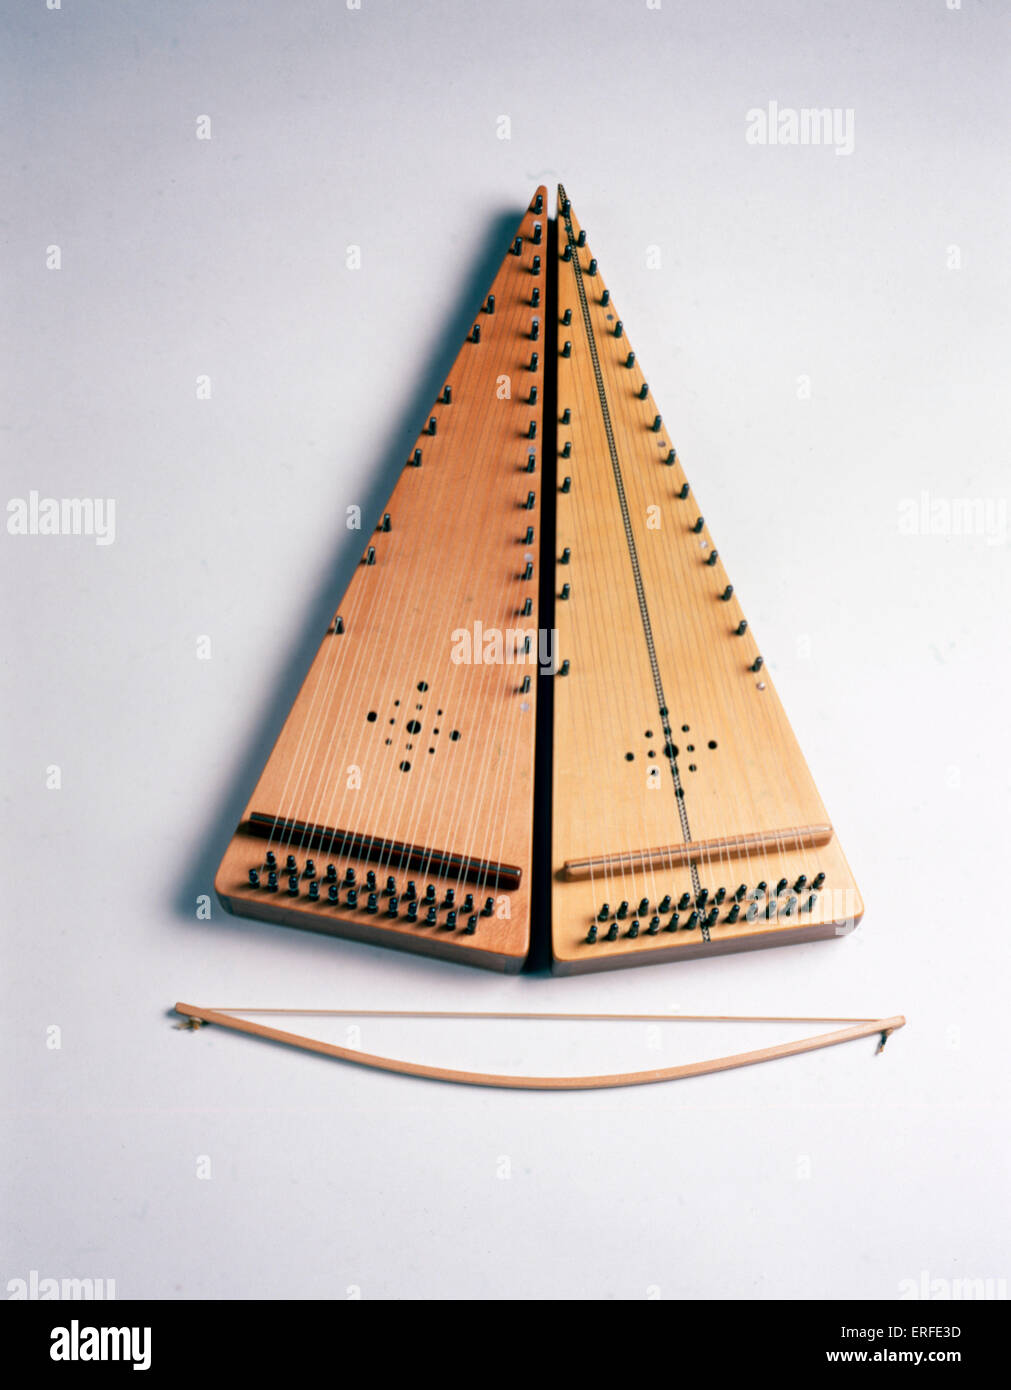 Early dulcimer/ psaltery  (bowed) .Two psalteries with bow. Stock Photo